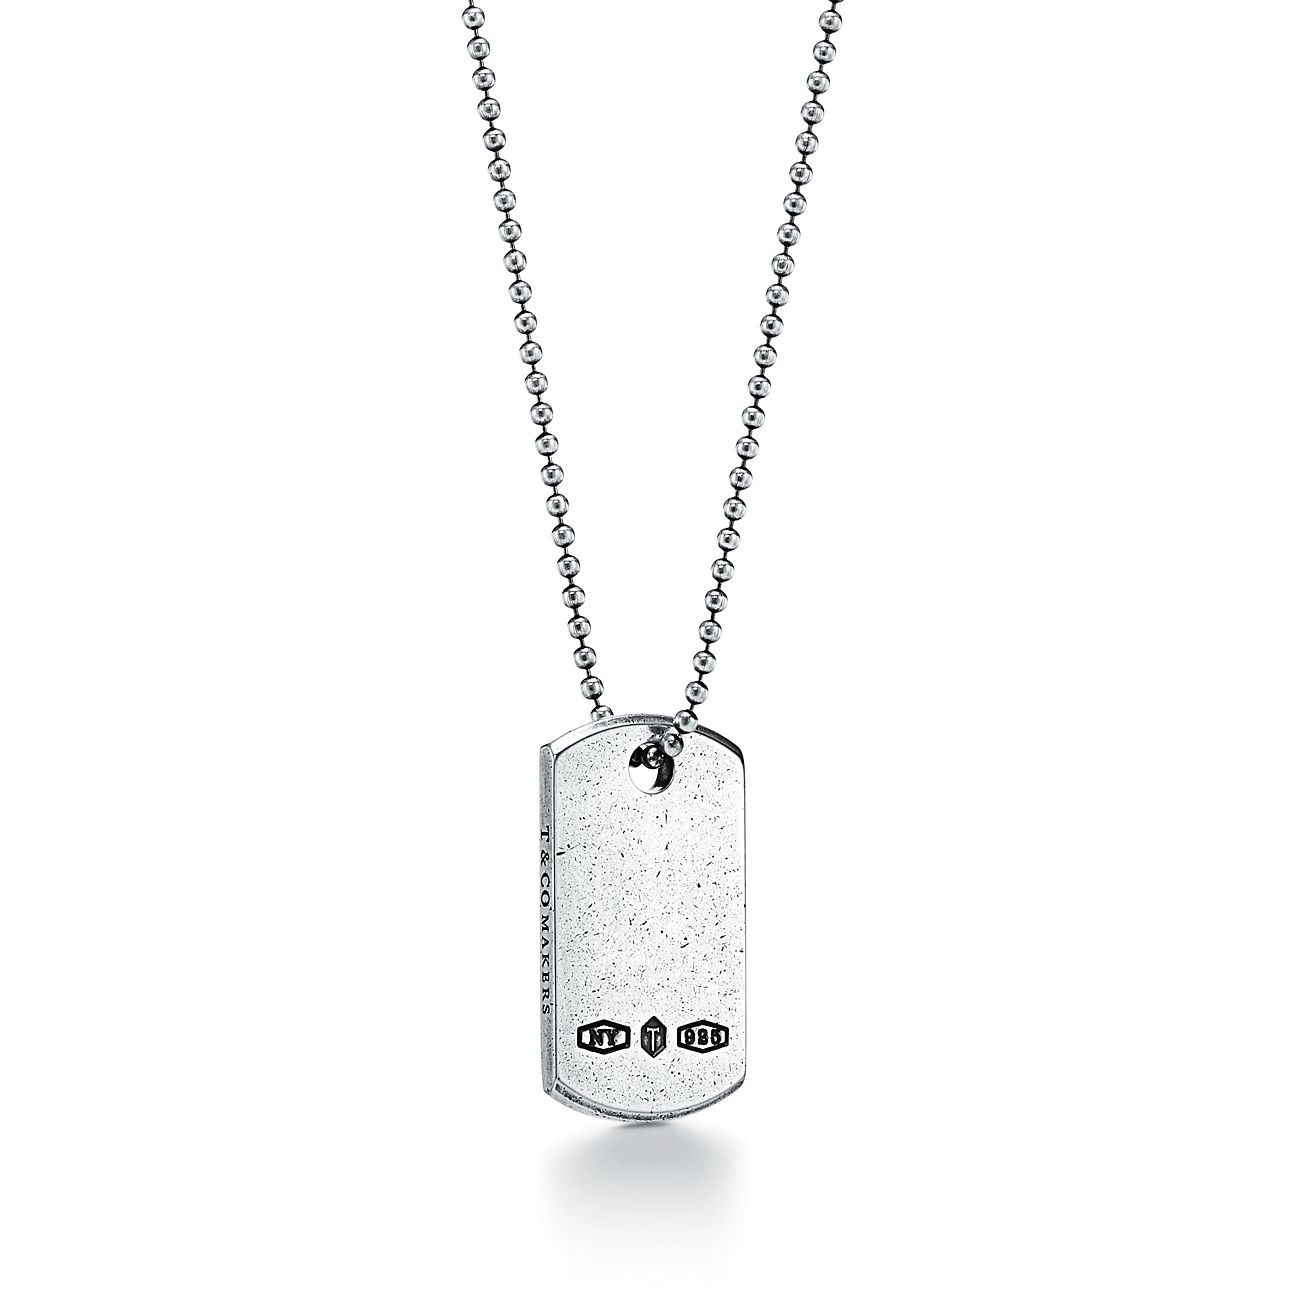 Tiffany 1837® Makers Tumbled I.D. Tag Pendant in Sterling Silver, 24"